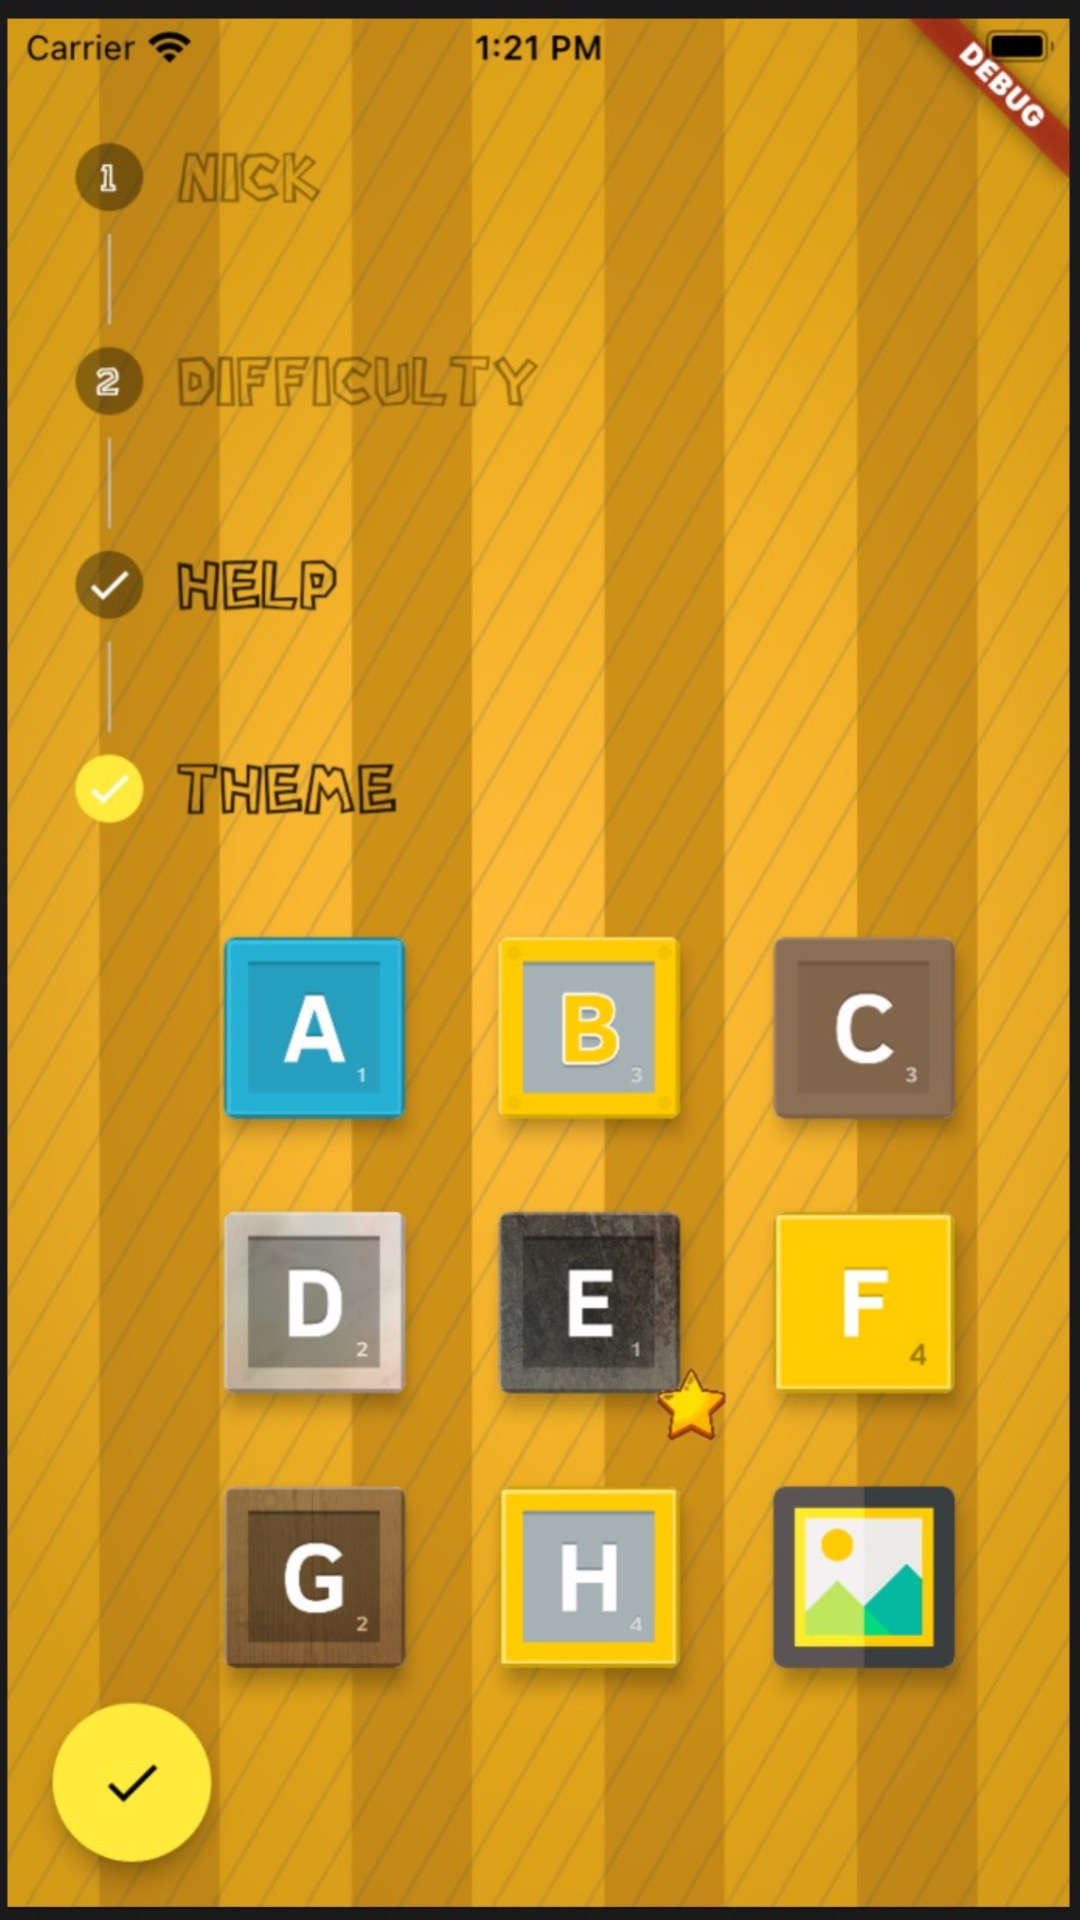 My Slider Puzzle download the last version for windows